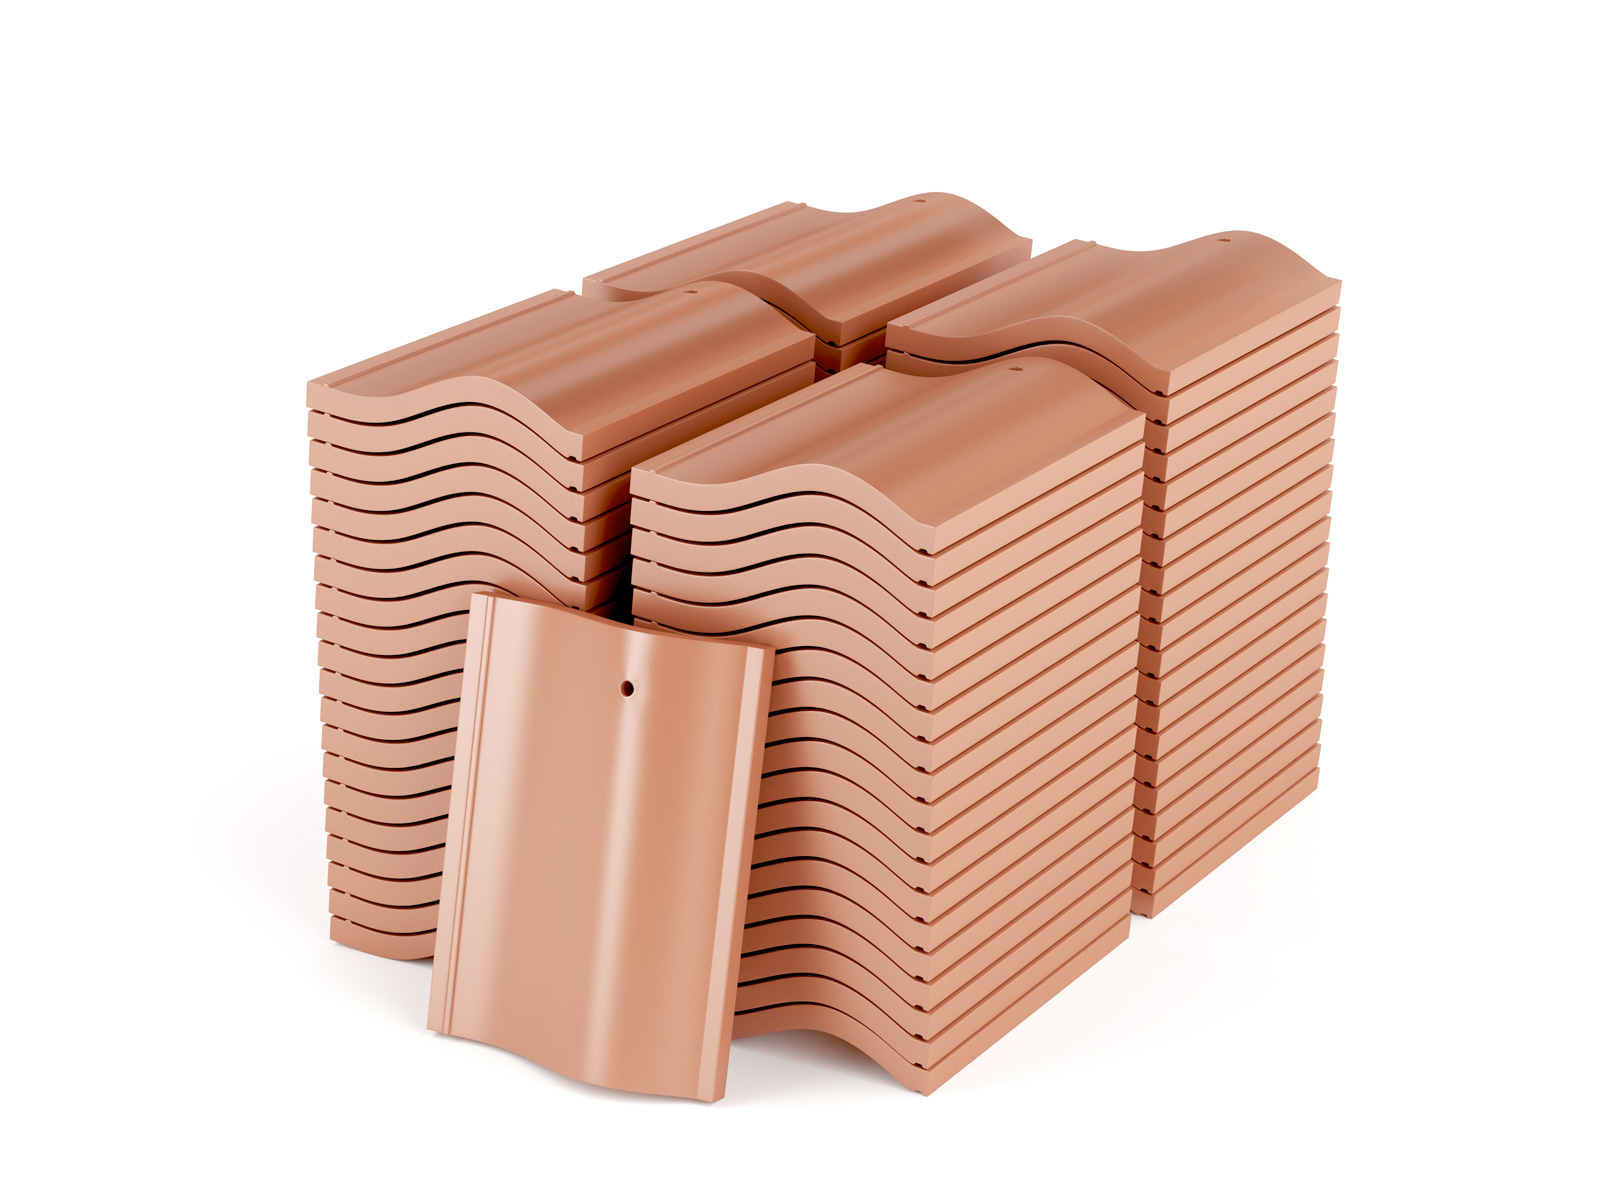 residential roofing tiles